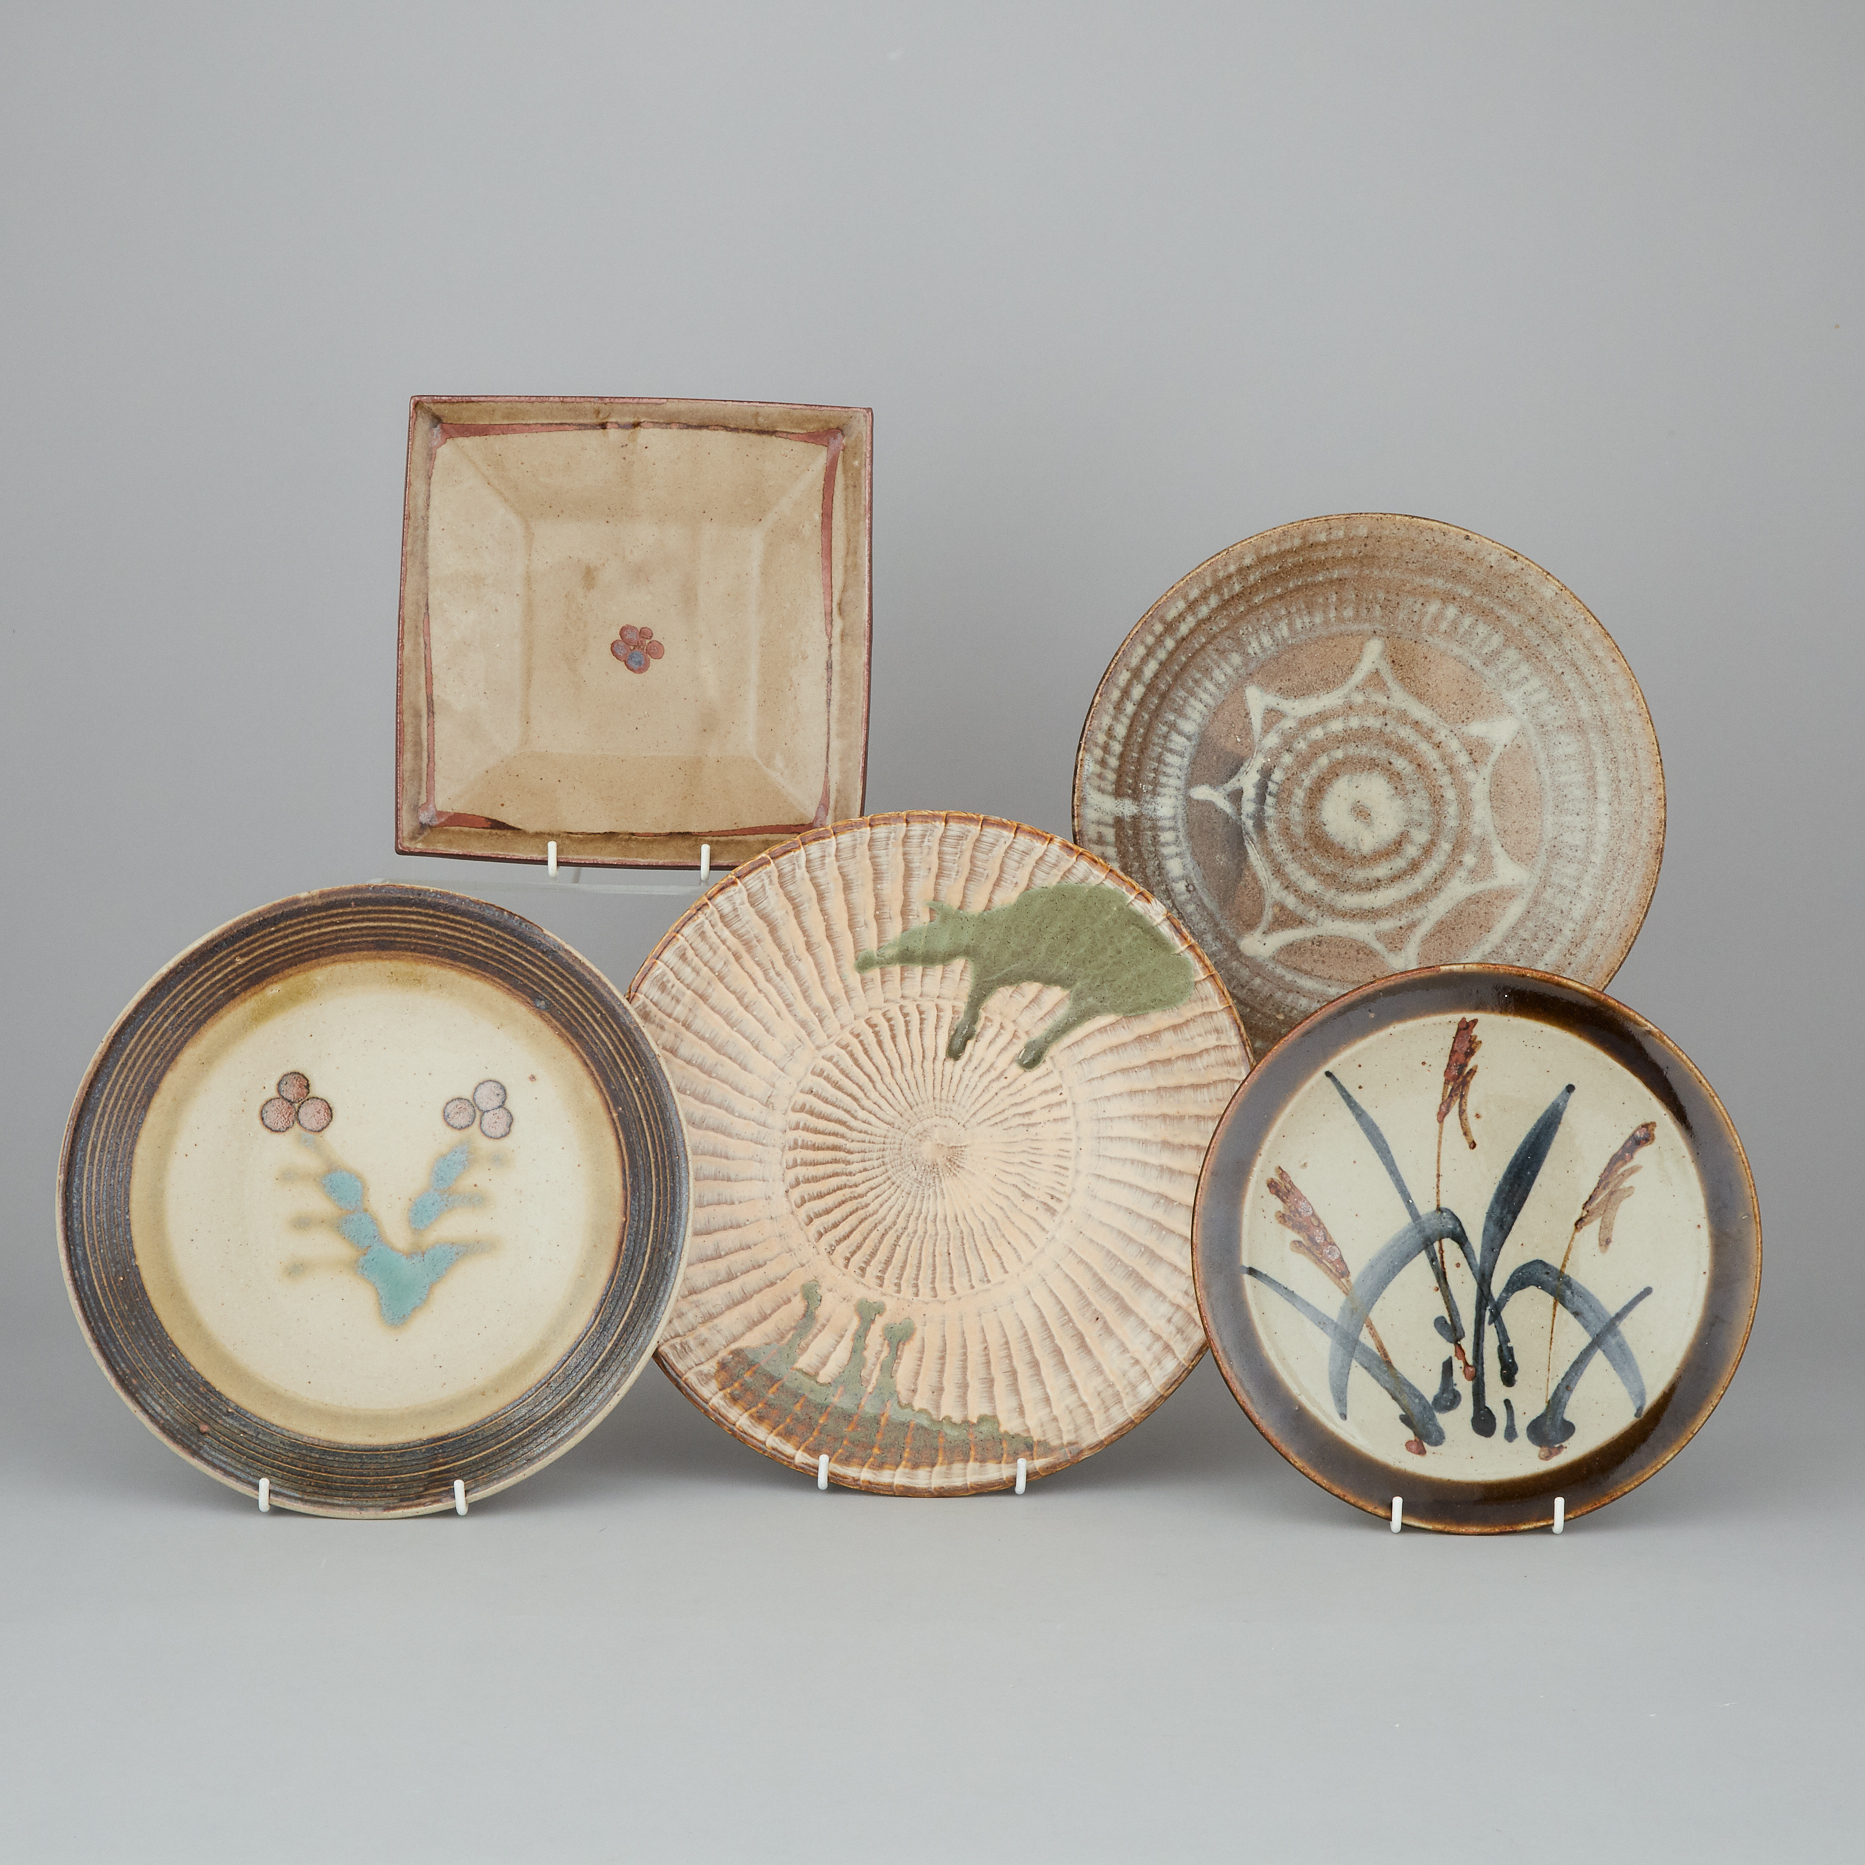 A Group of Five Assorted Mingei Pottery Plates, Circa 1960